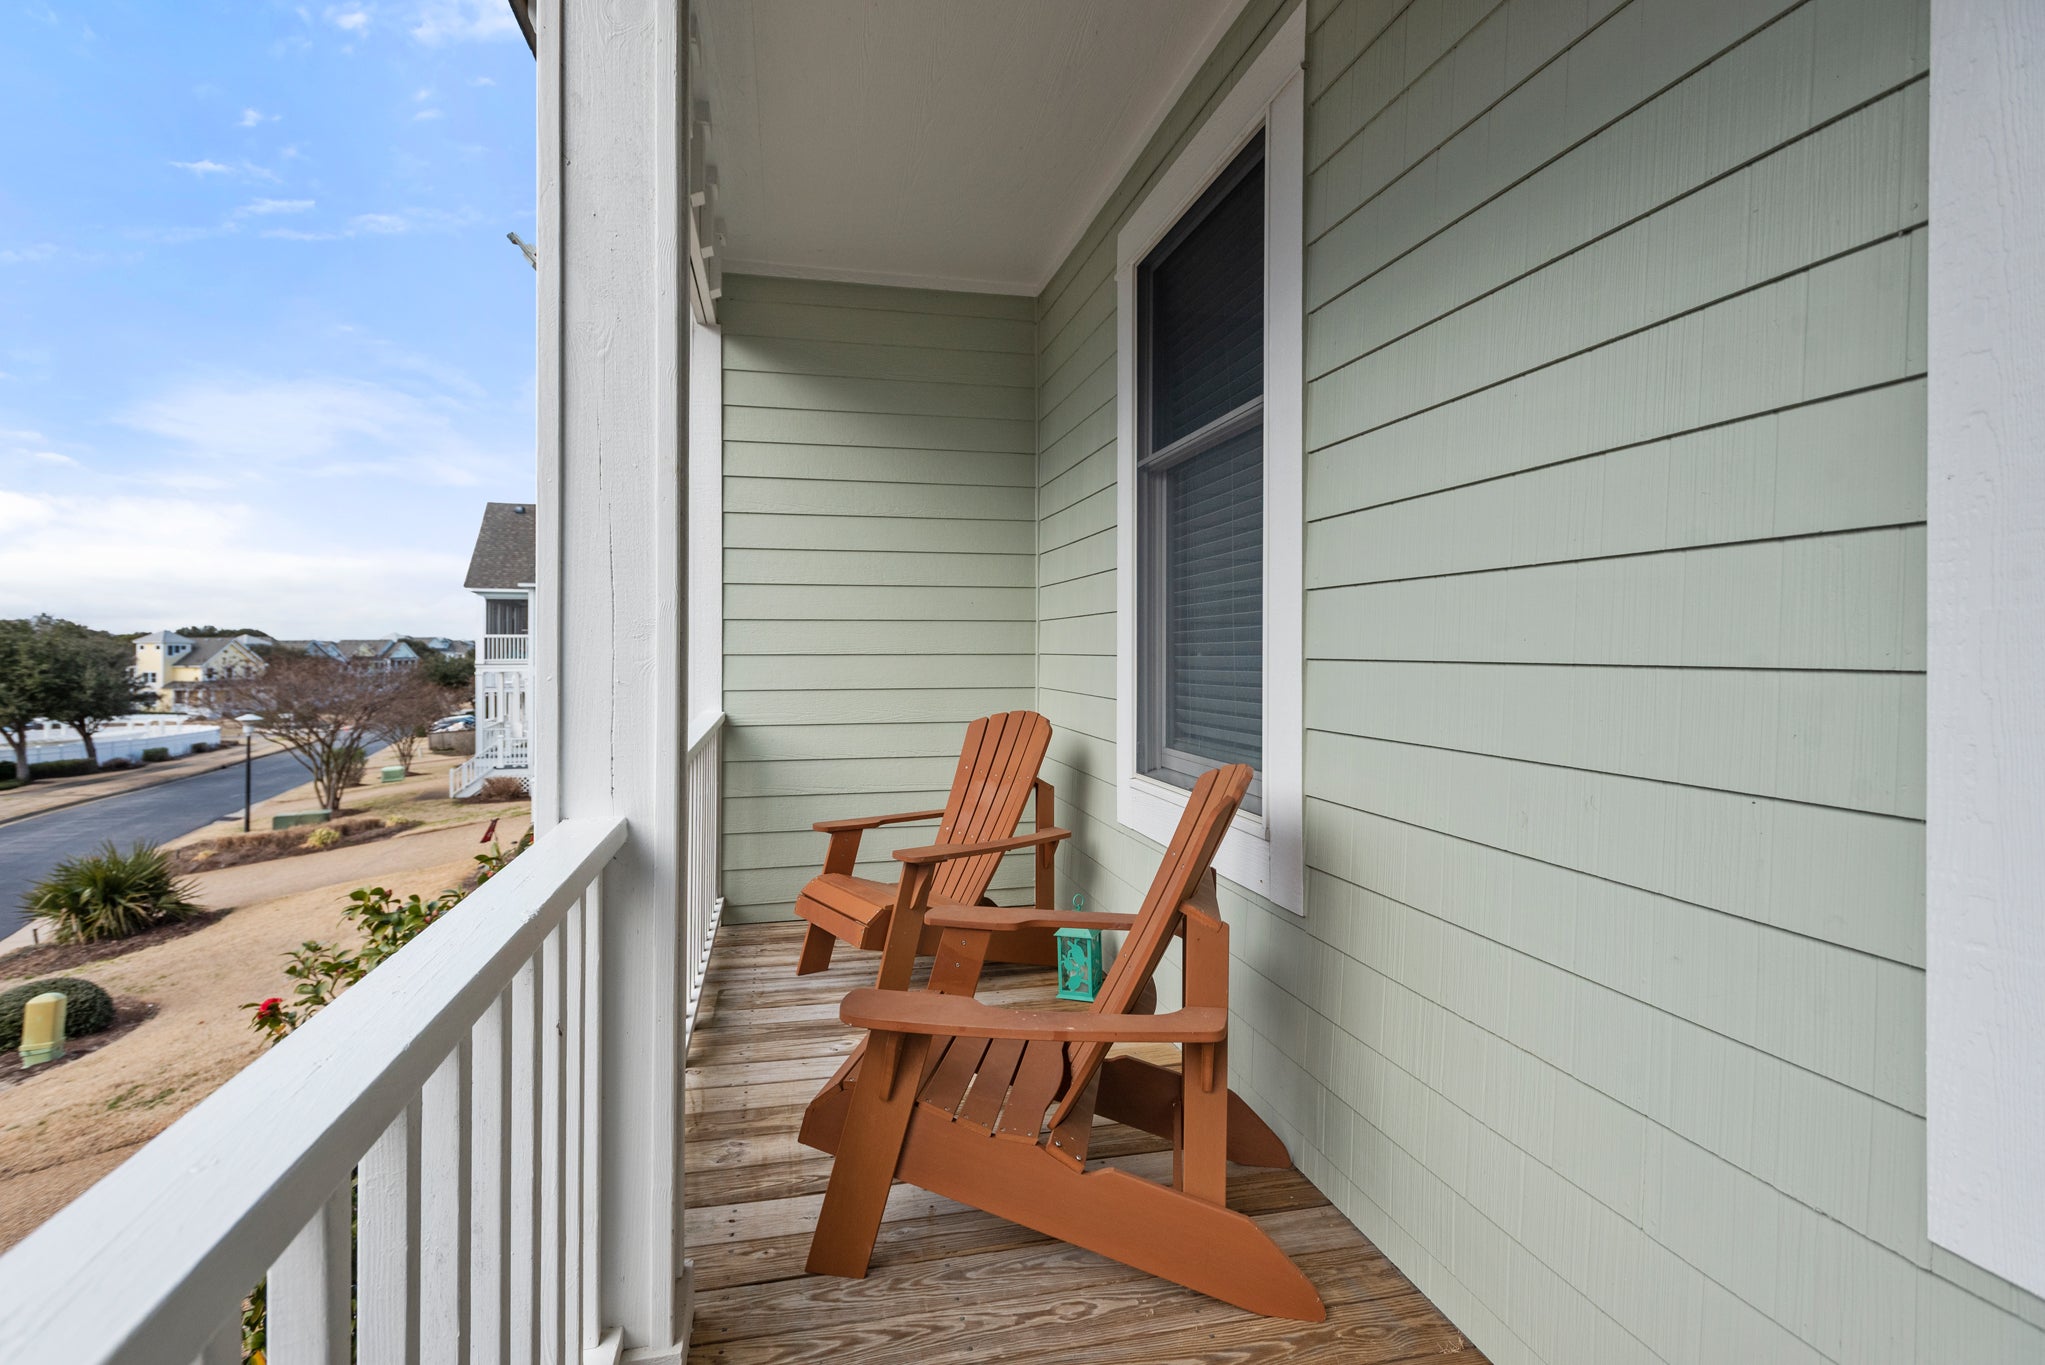 HK29: Beachin' Up With The Jones's | Bottom Level Front Porch